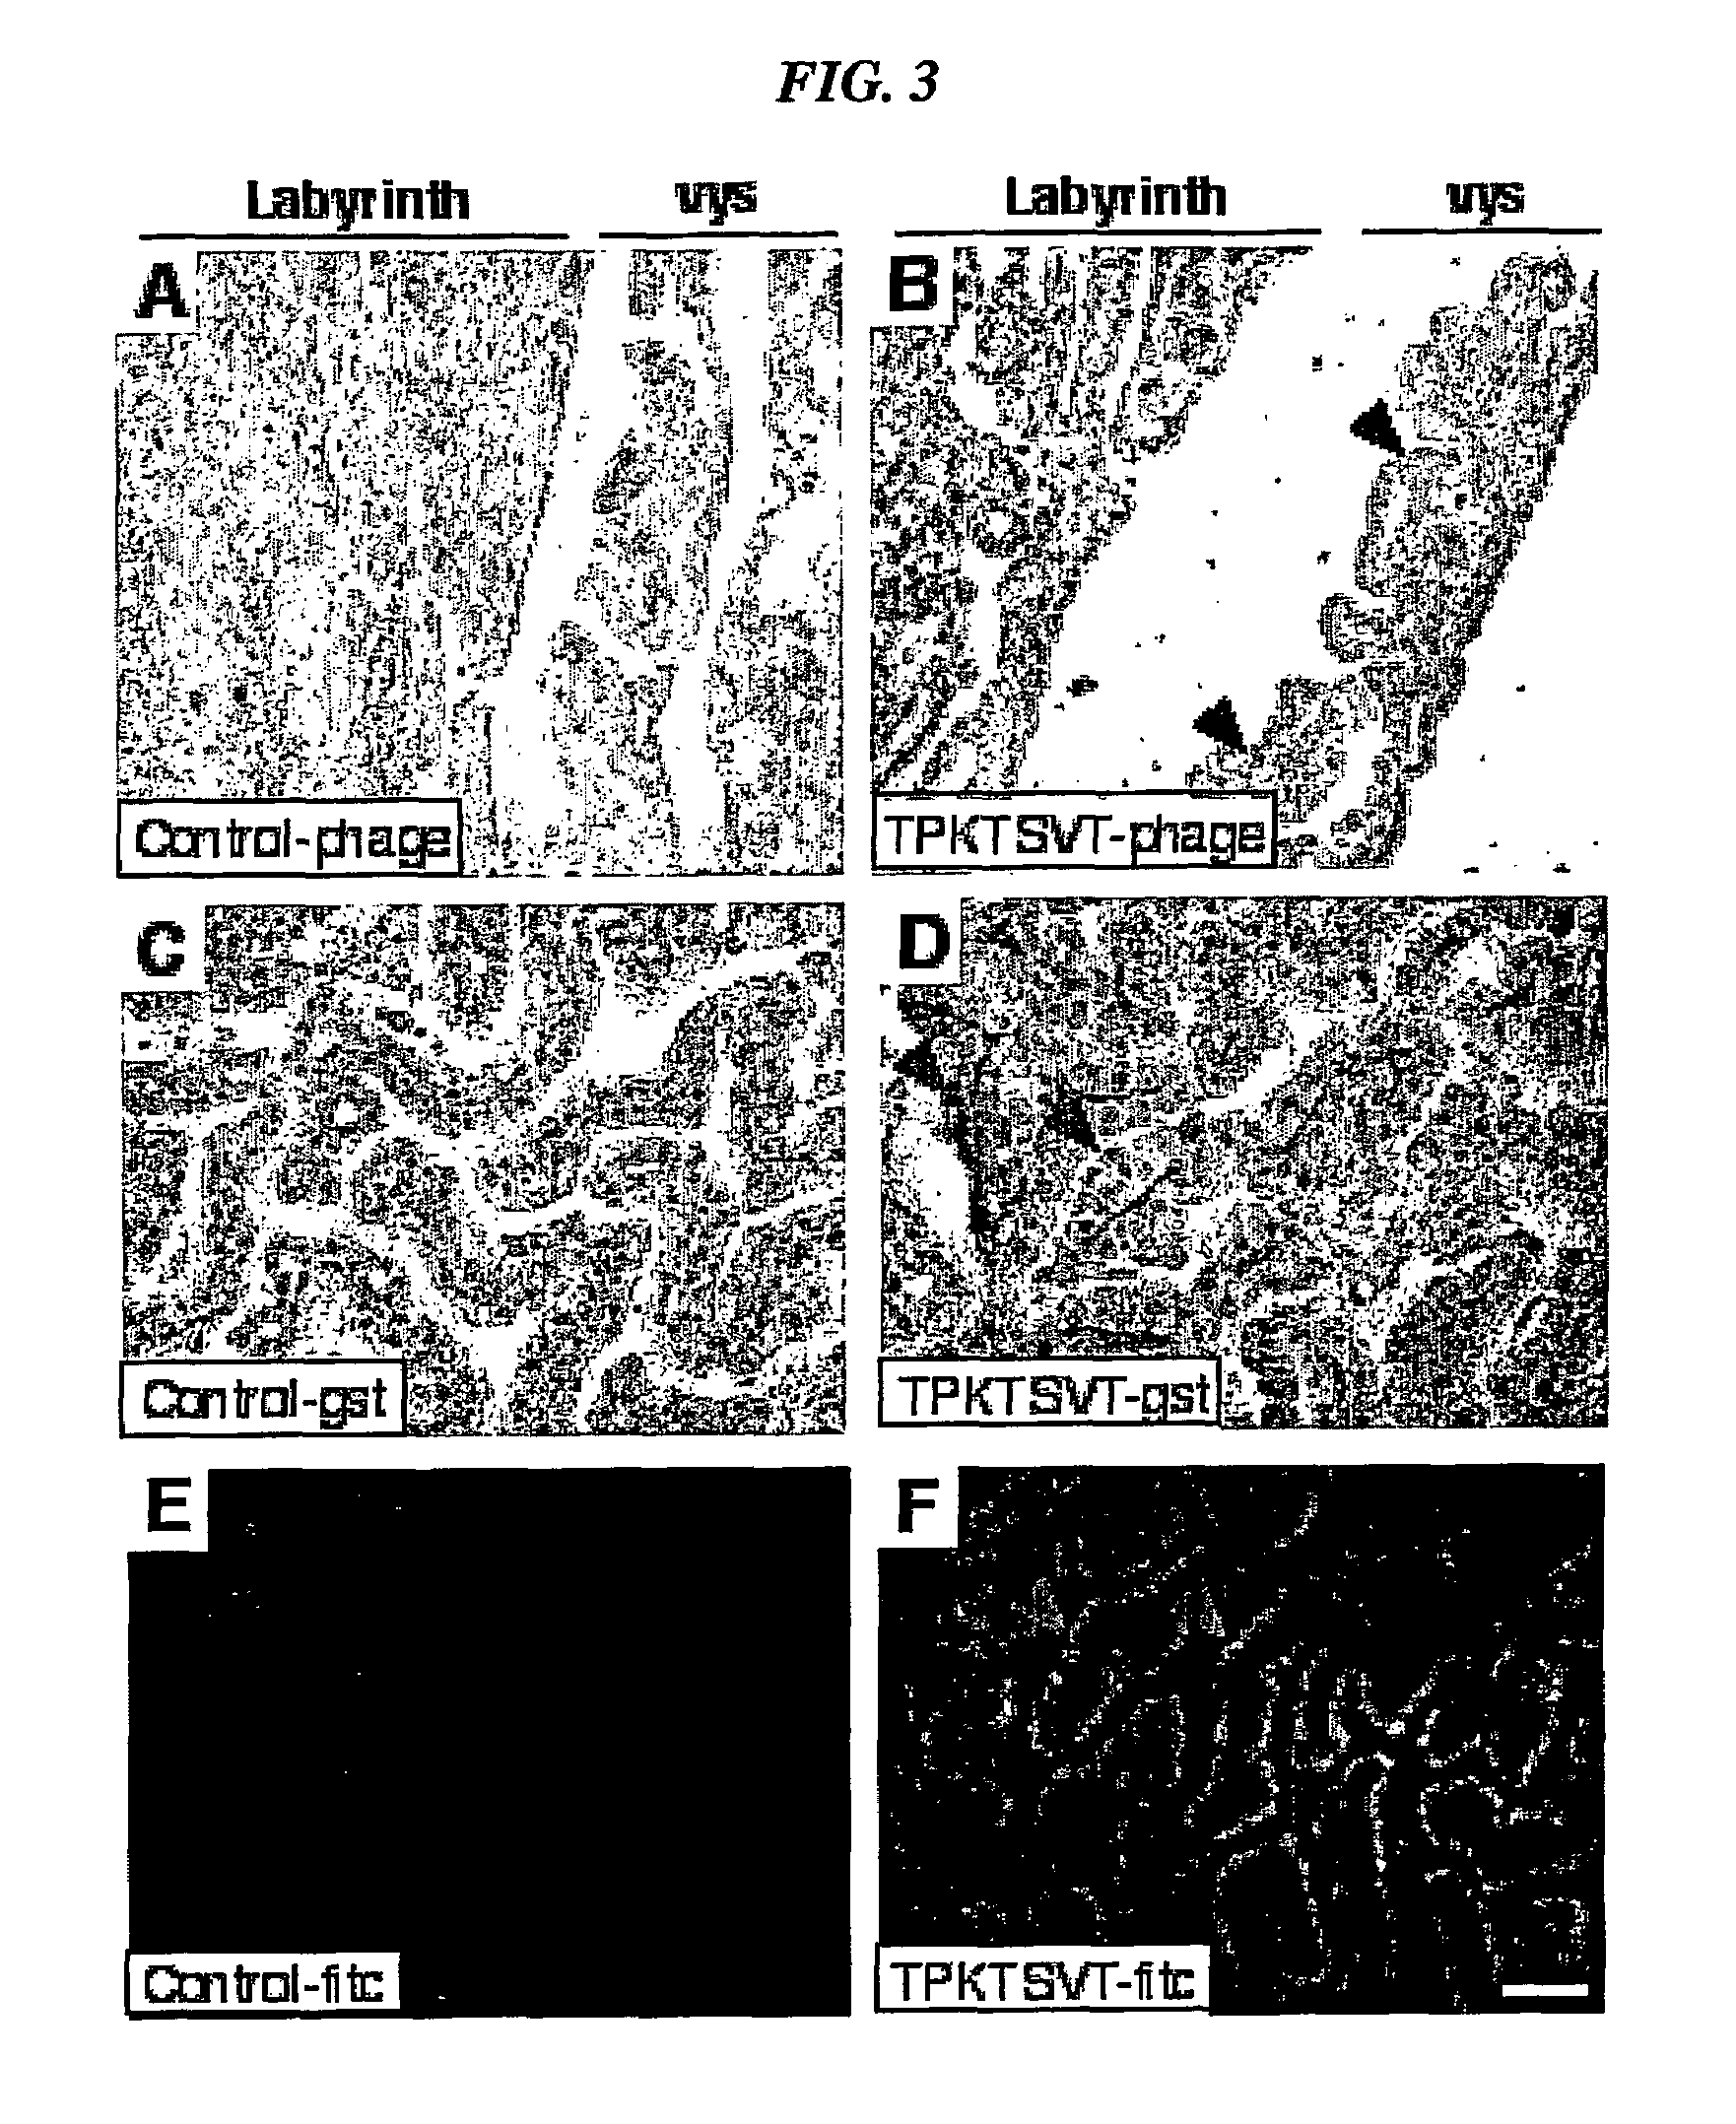 Compositions and methods of use of targeting peptides against placenta and adipose tissues